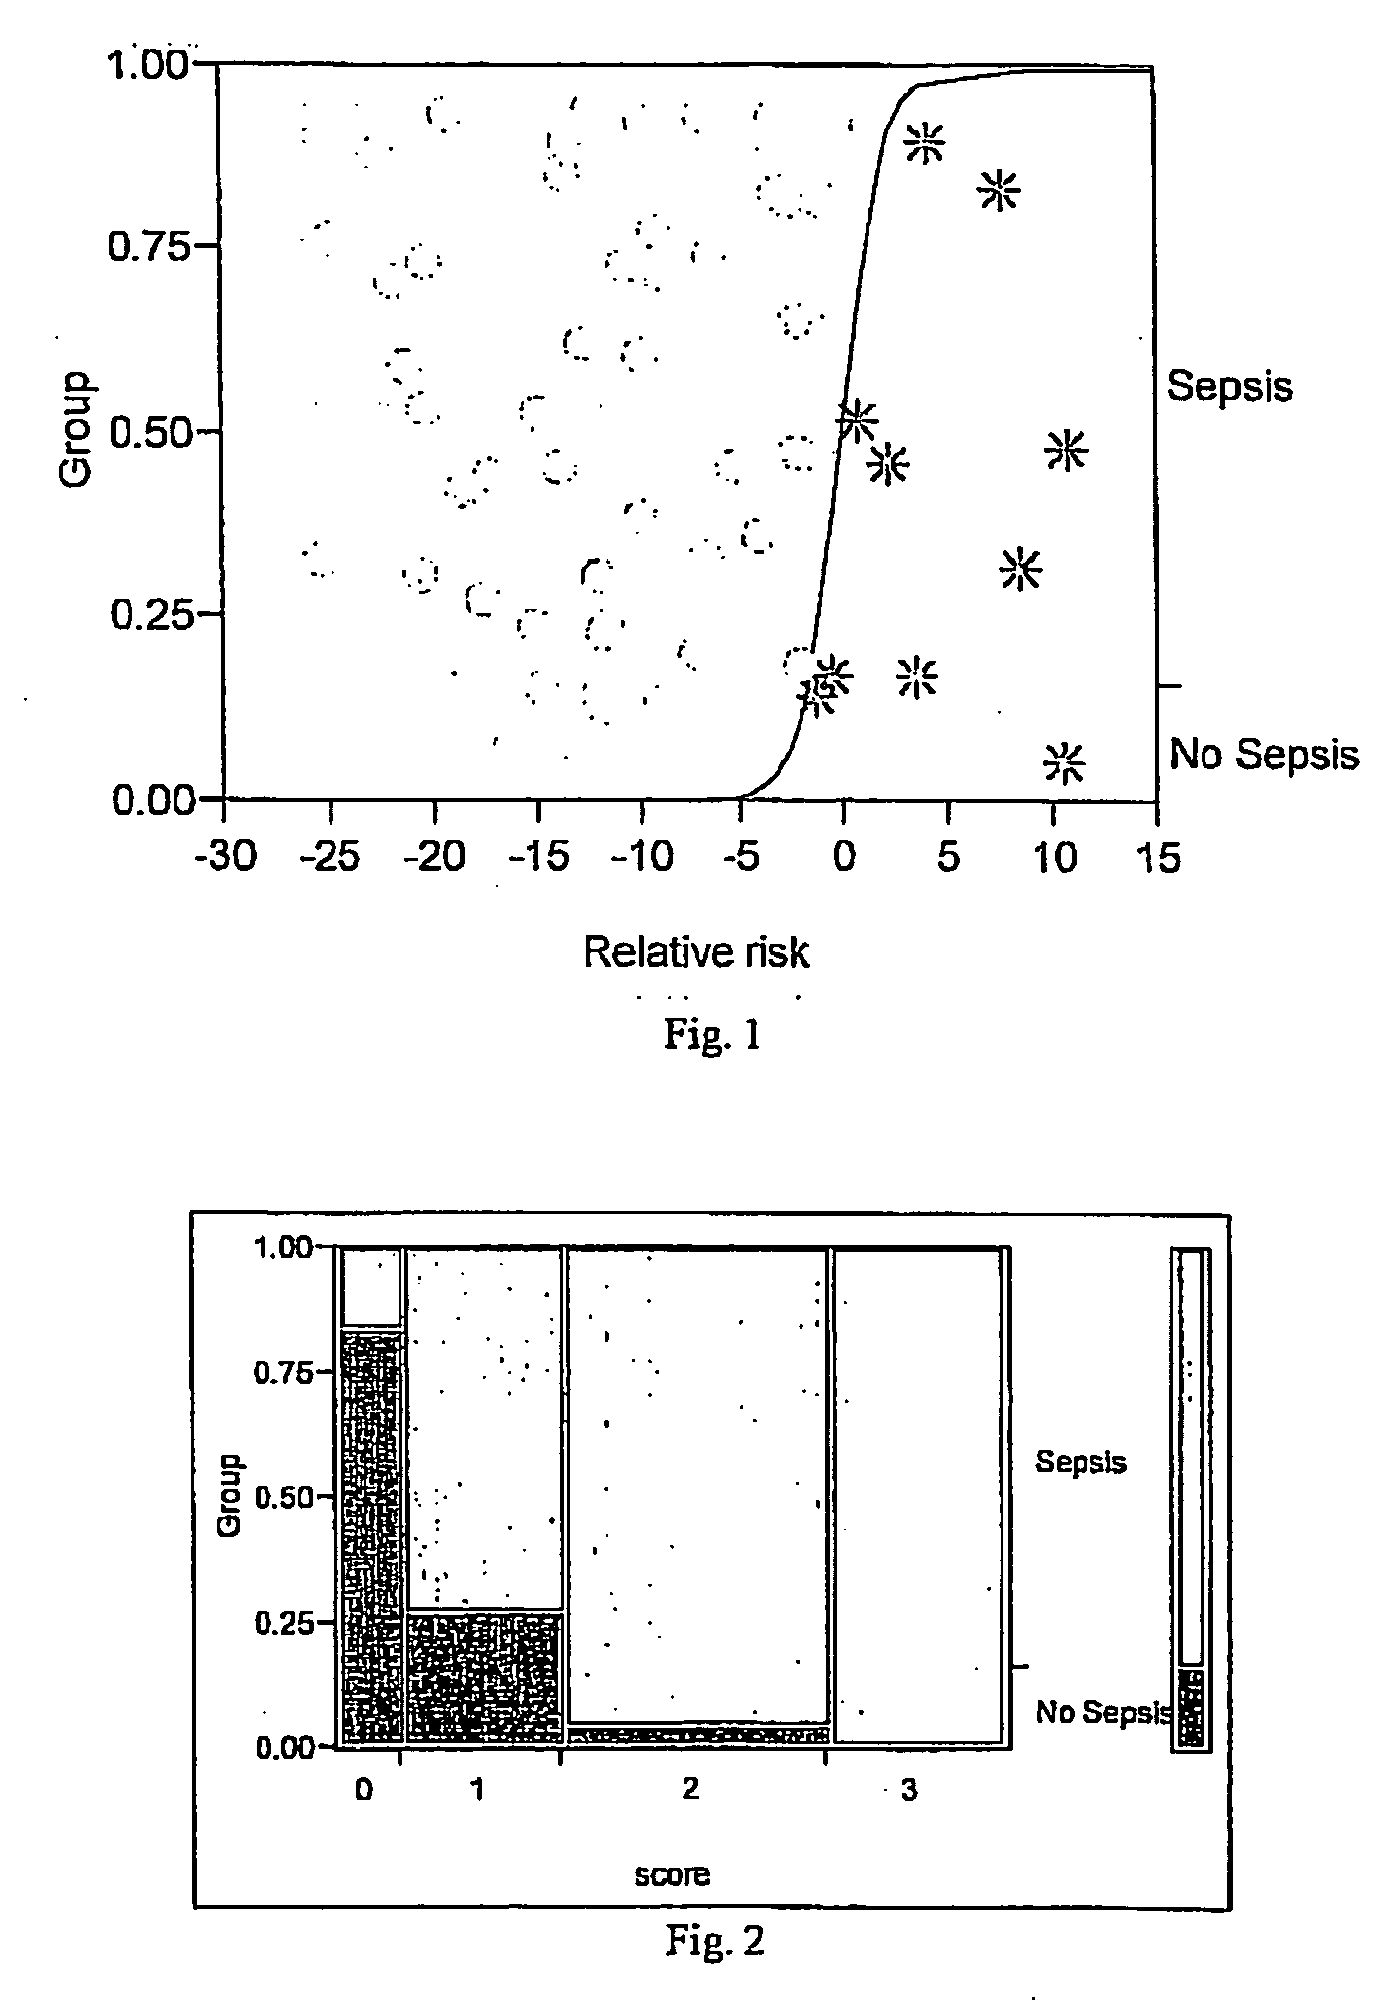 Method for detecting or monitoring sepsis by analysing cytokine mRNA expression levels